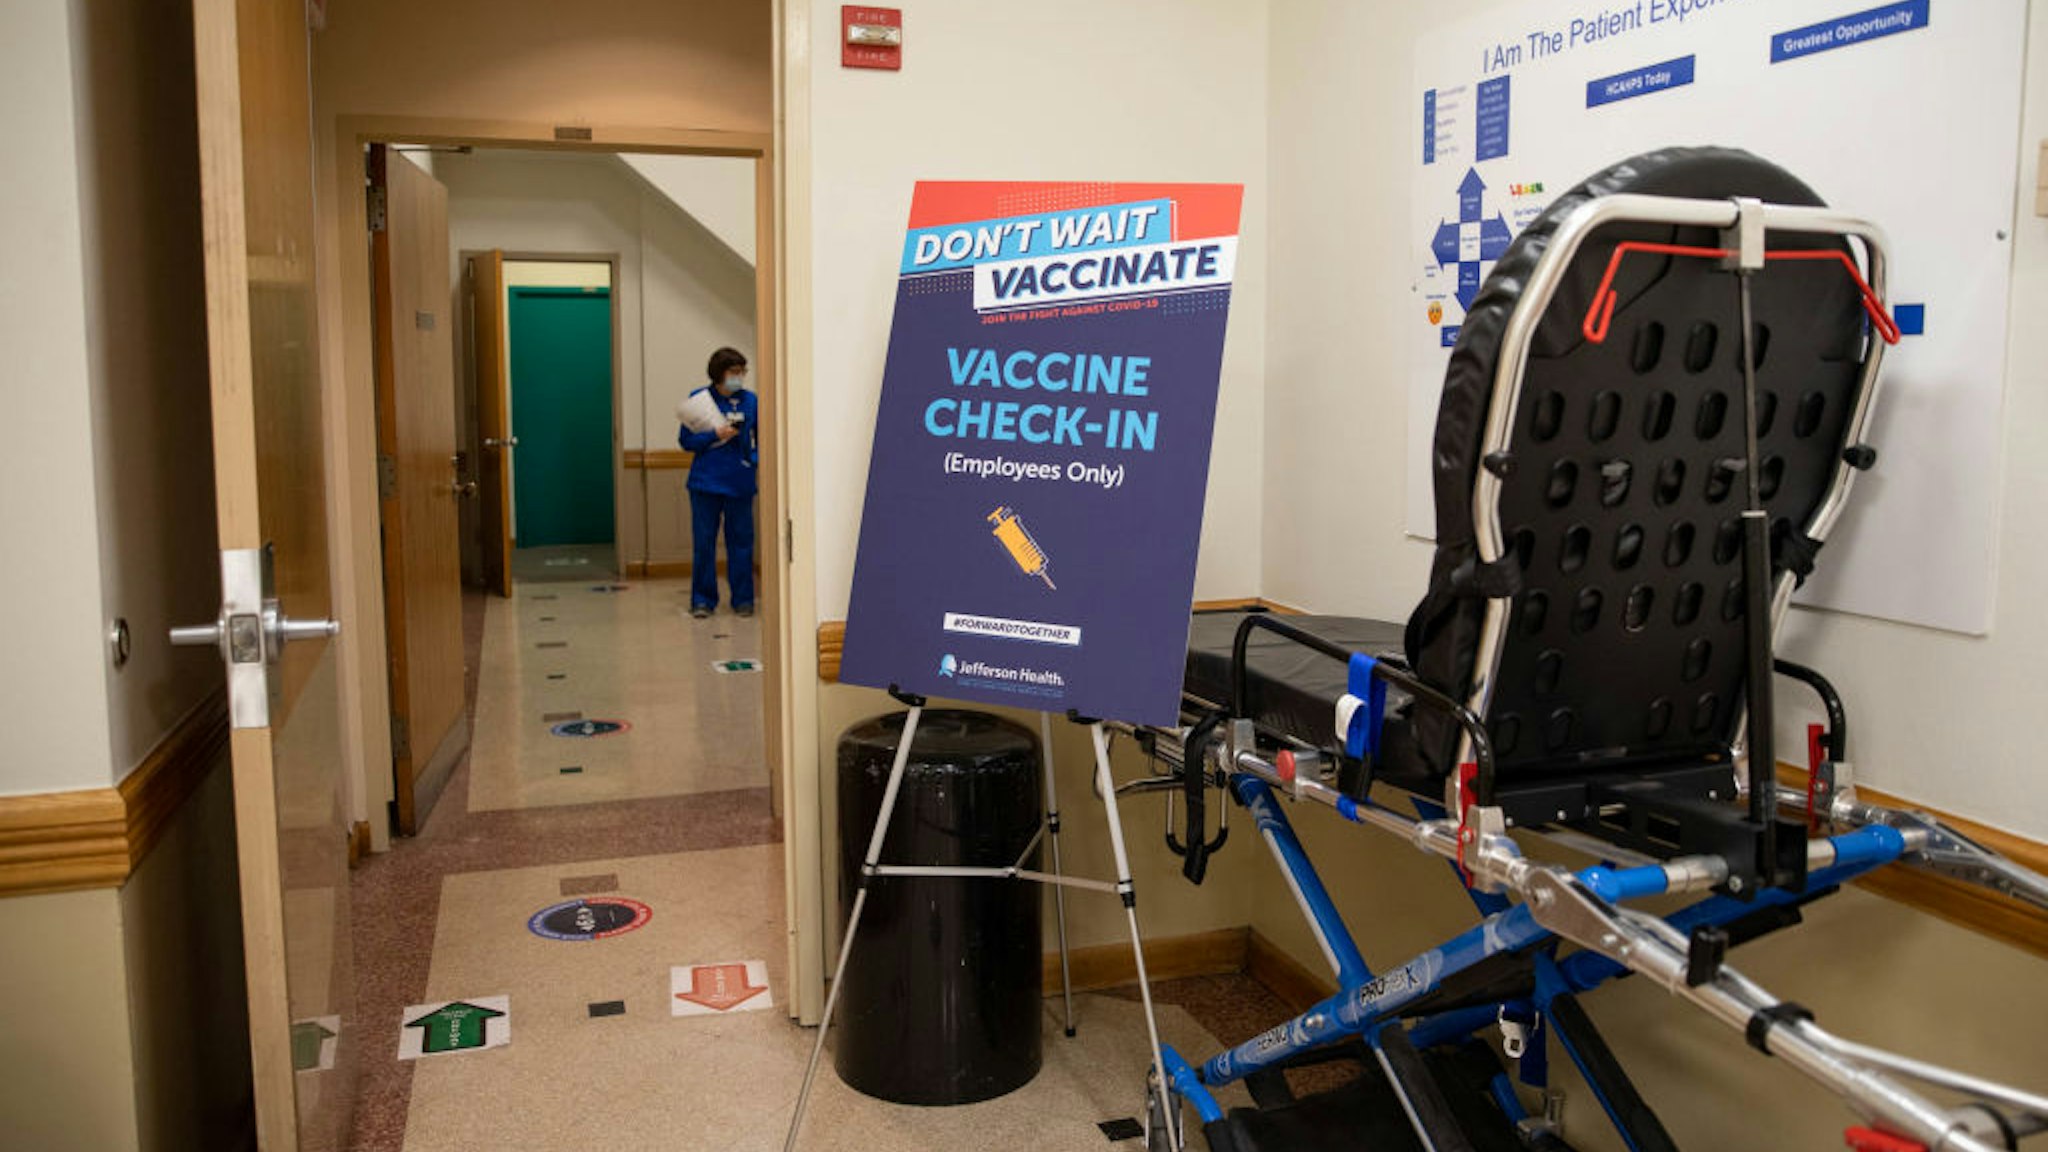 A sign signifies the check-in location for people waiting to be vaccinated for the Covid-19 vaccine at Thomas Jefferson University Hospital in Philadelphia, Pennsylvania on December 16, 2020.